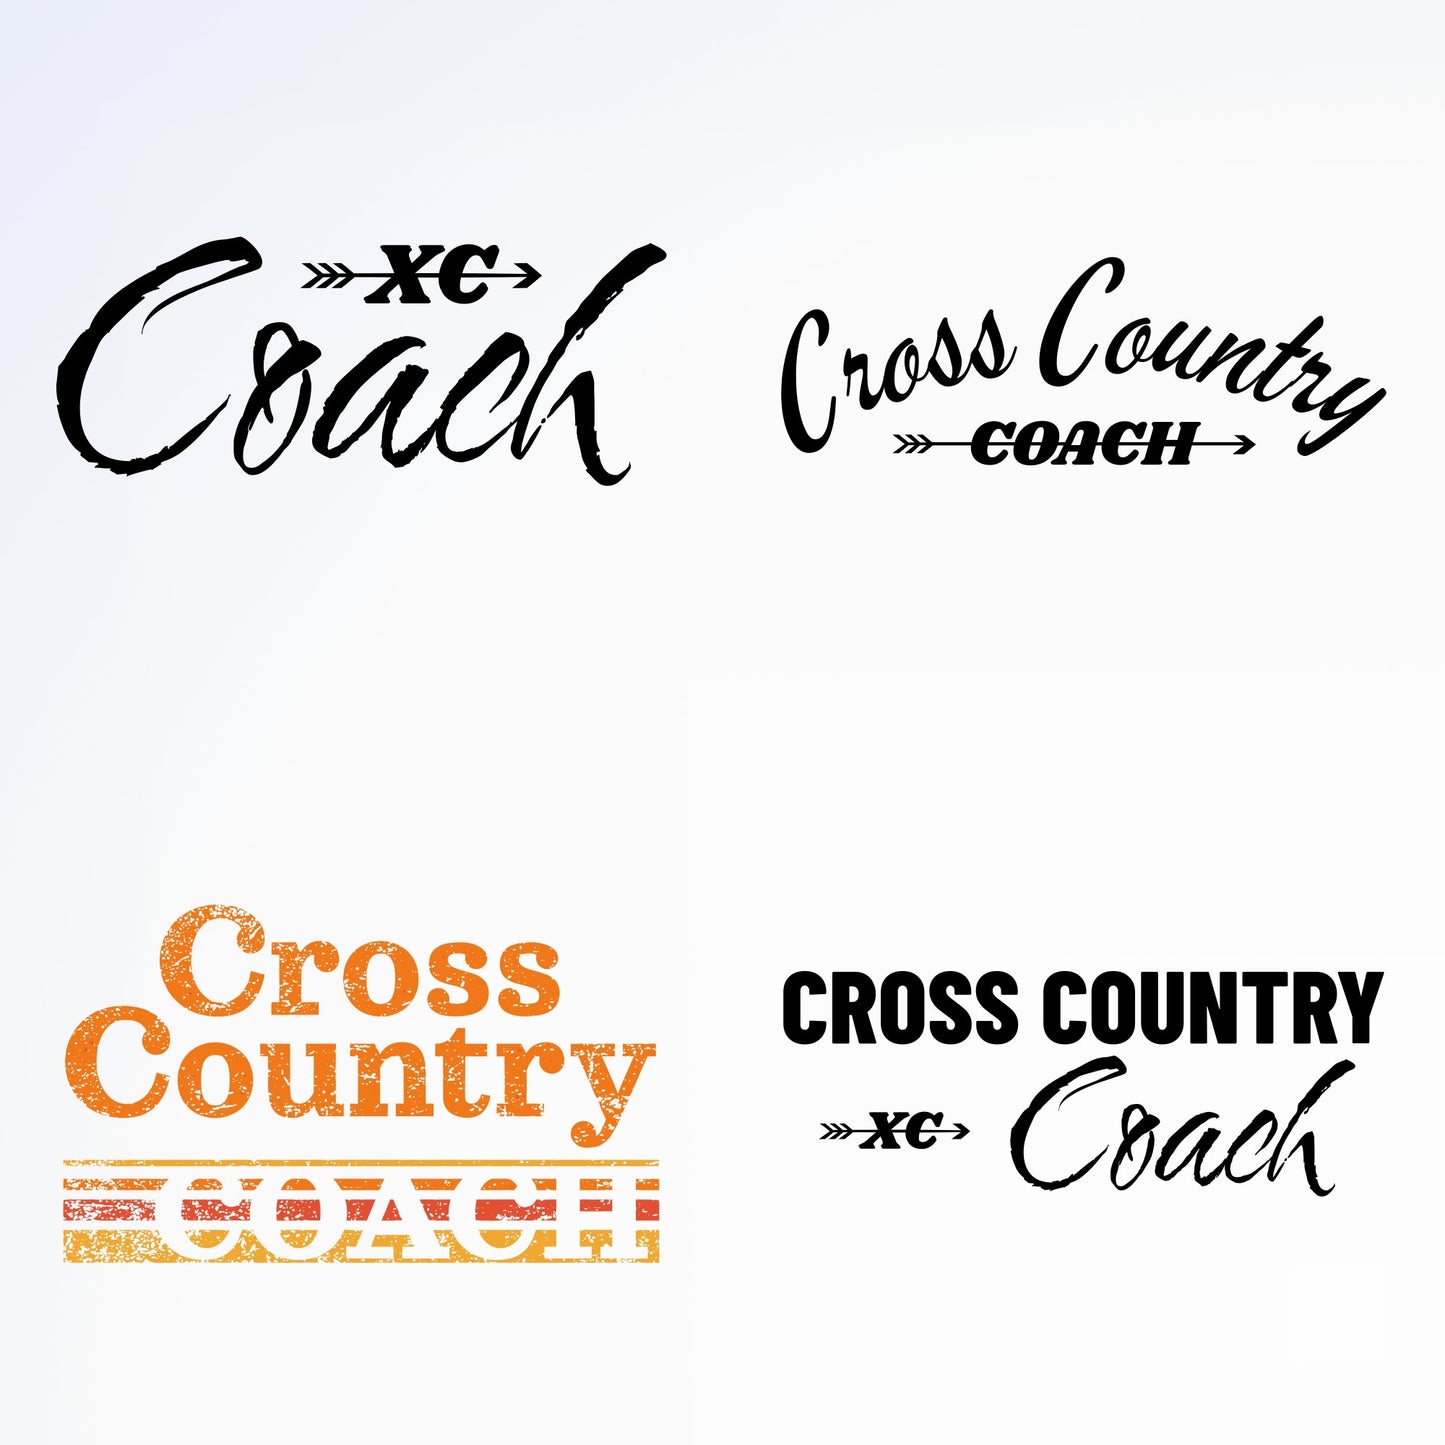 The image is of text that reads "Cross Country Coach".